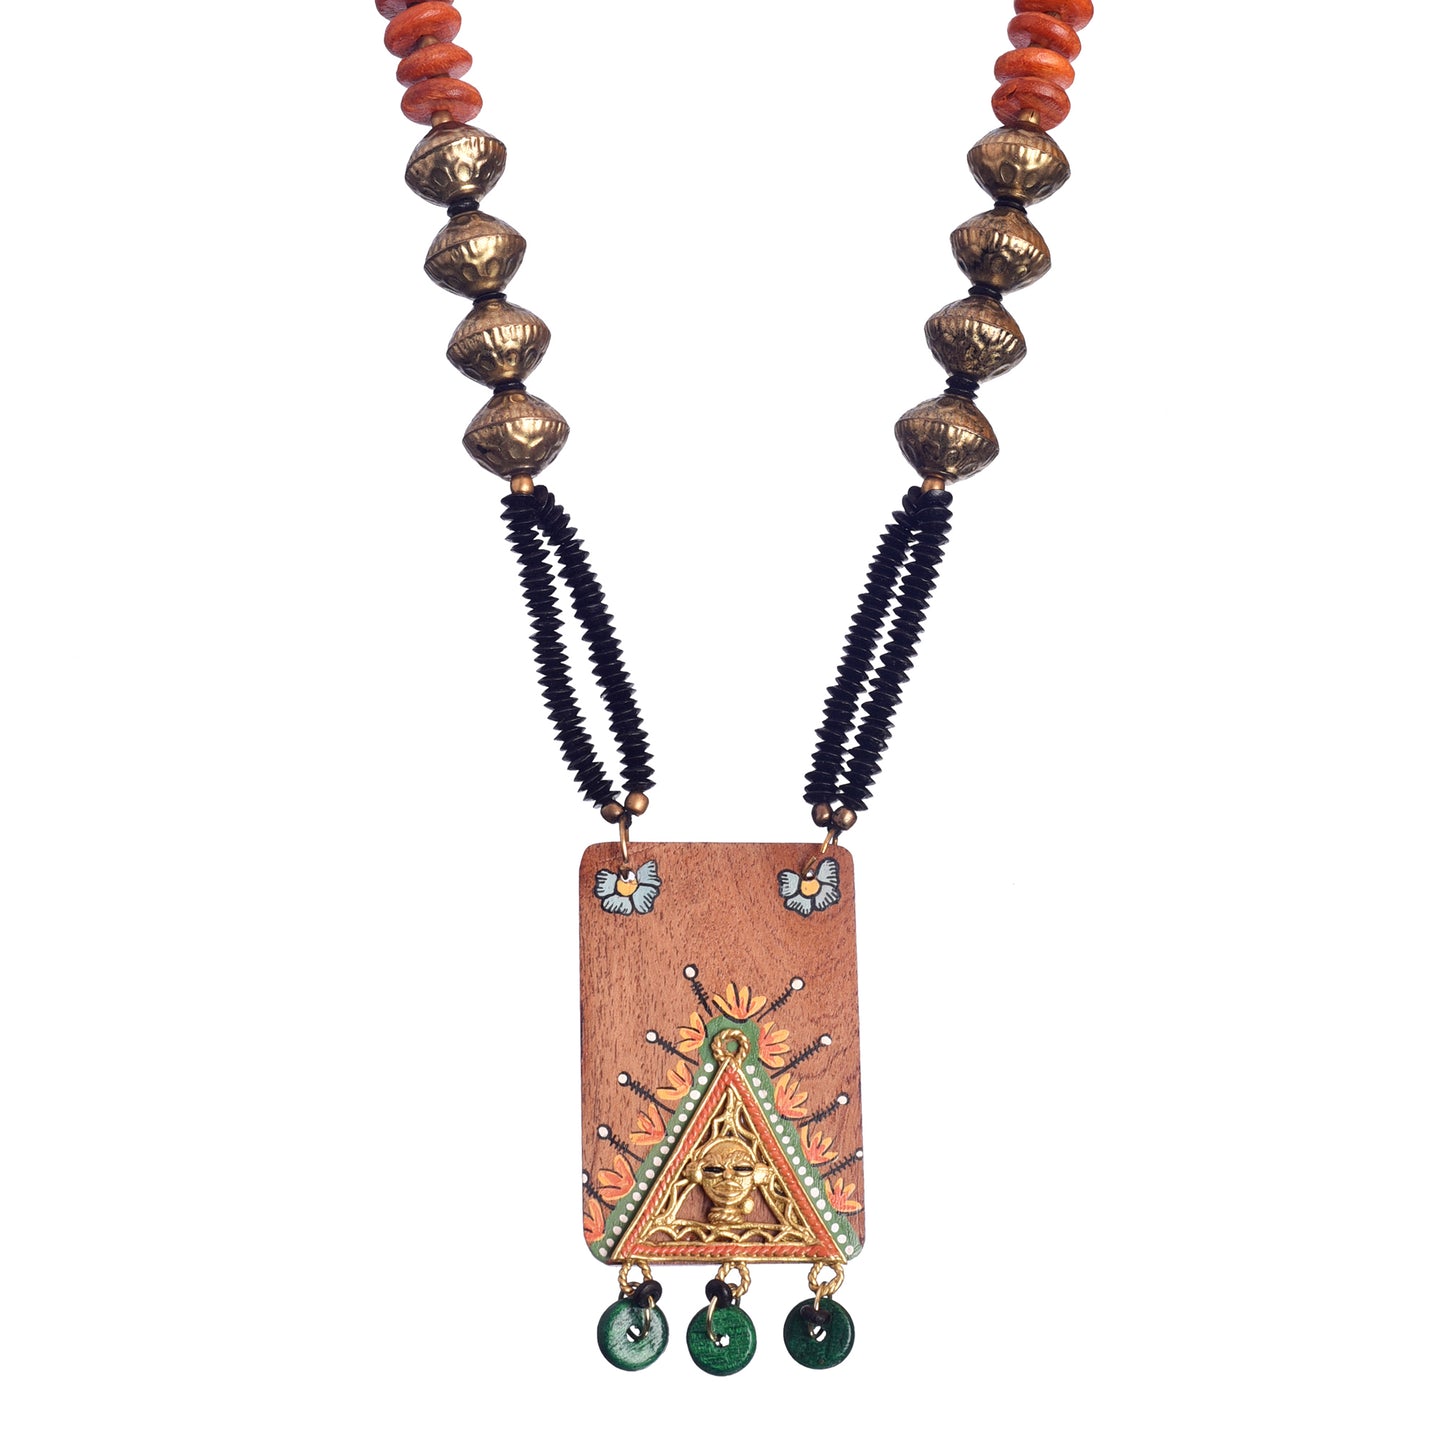 King Tut' Handcrafted Tribal Dokra Necklace